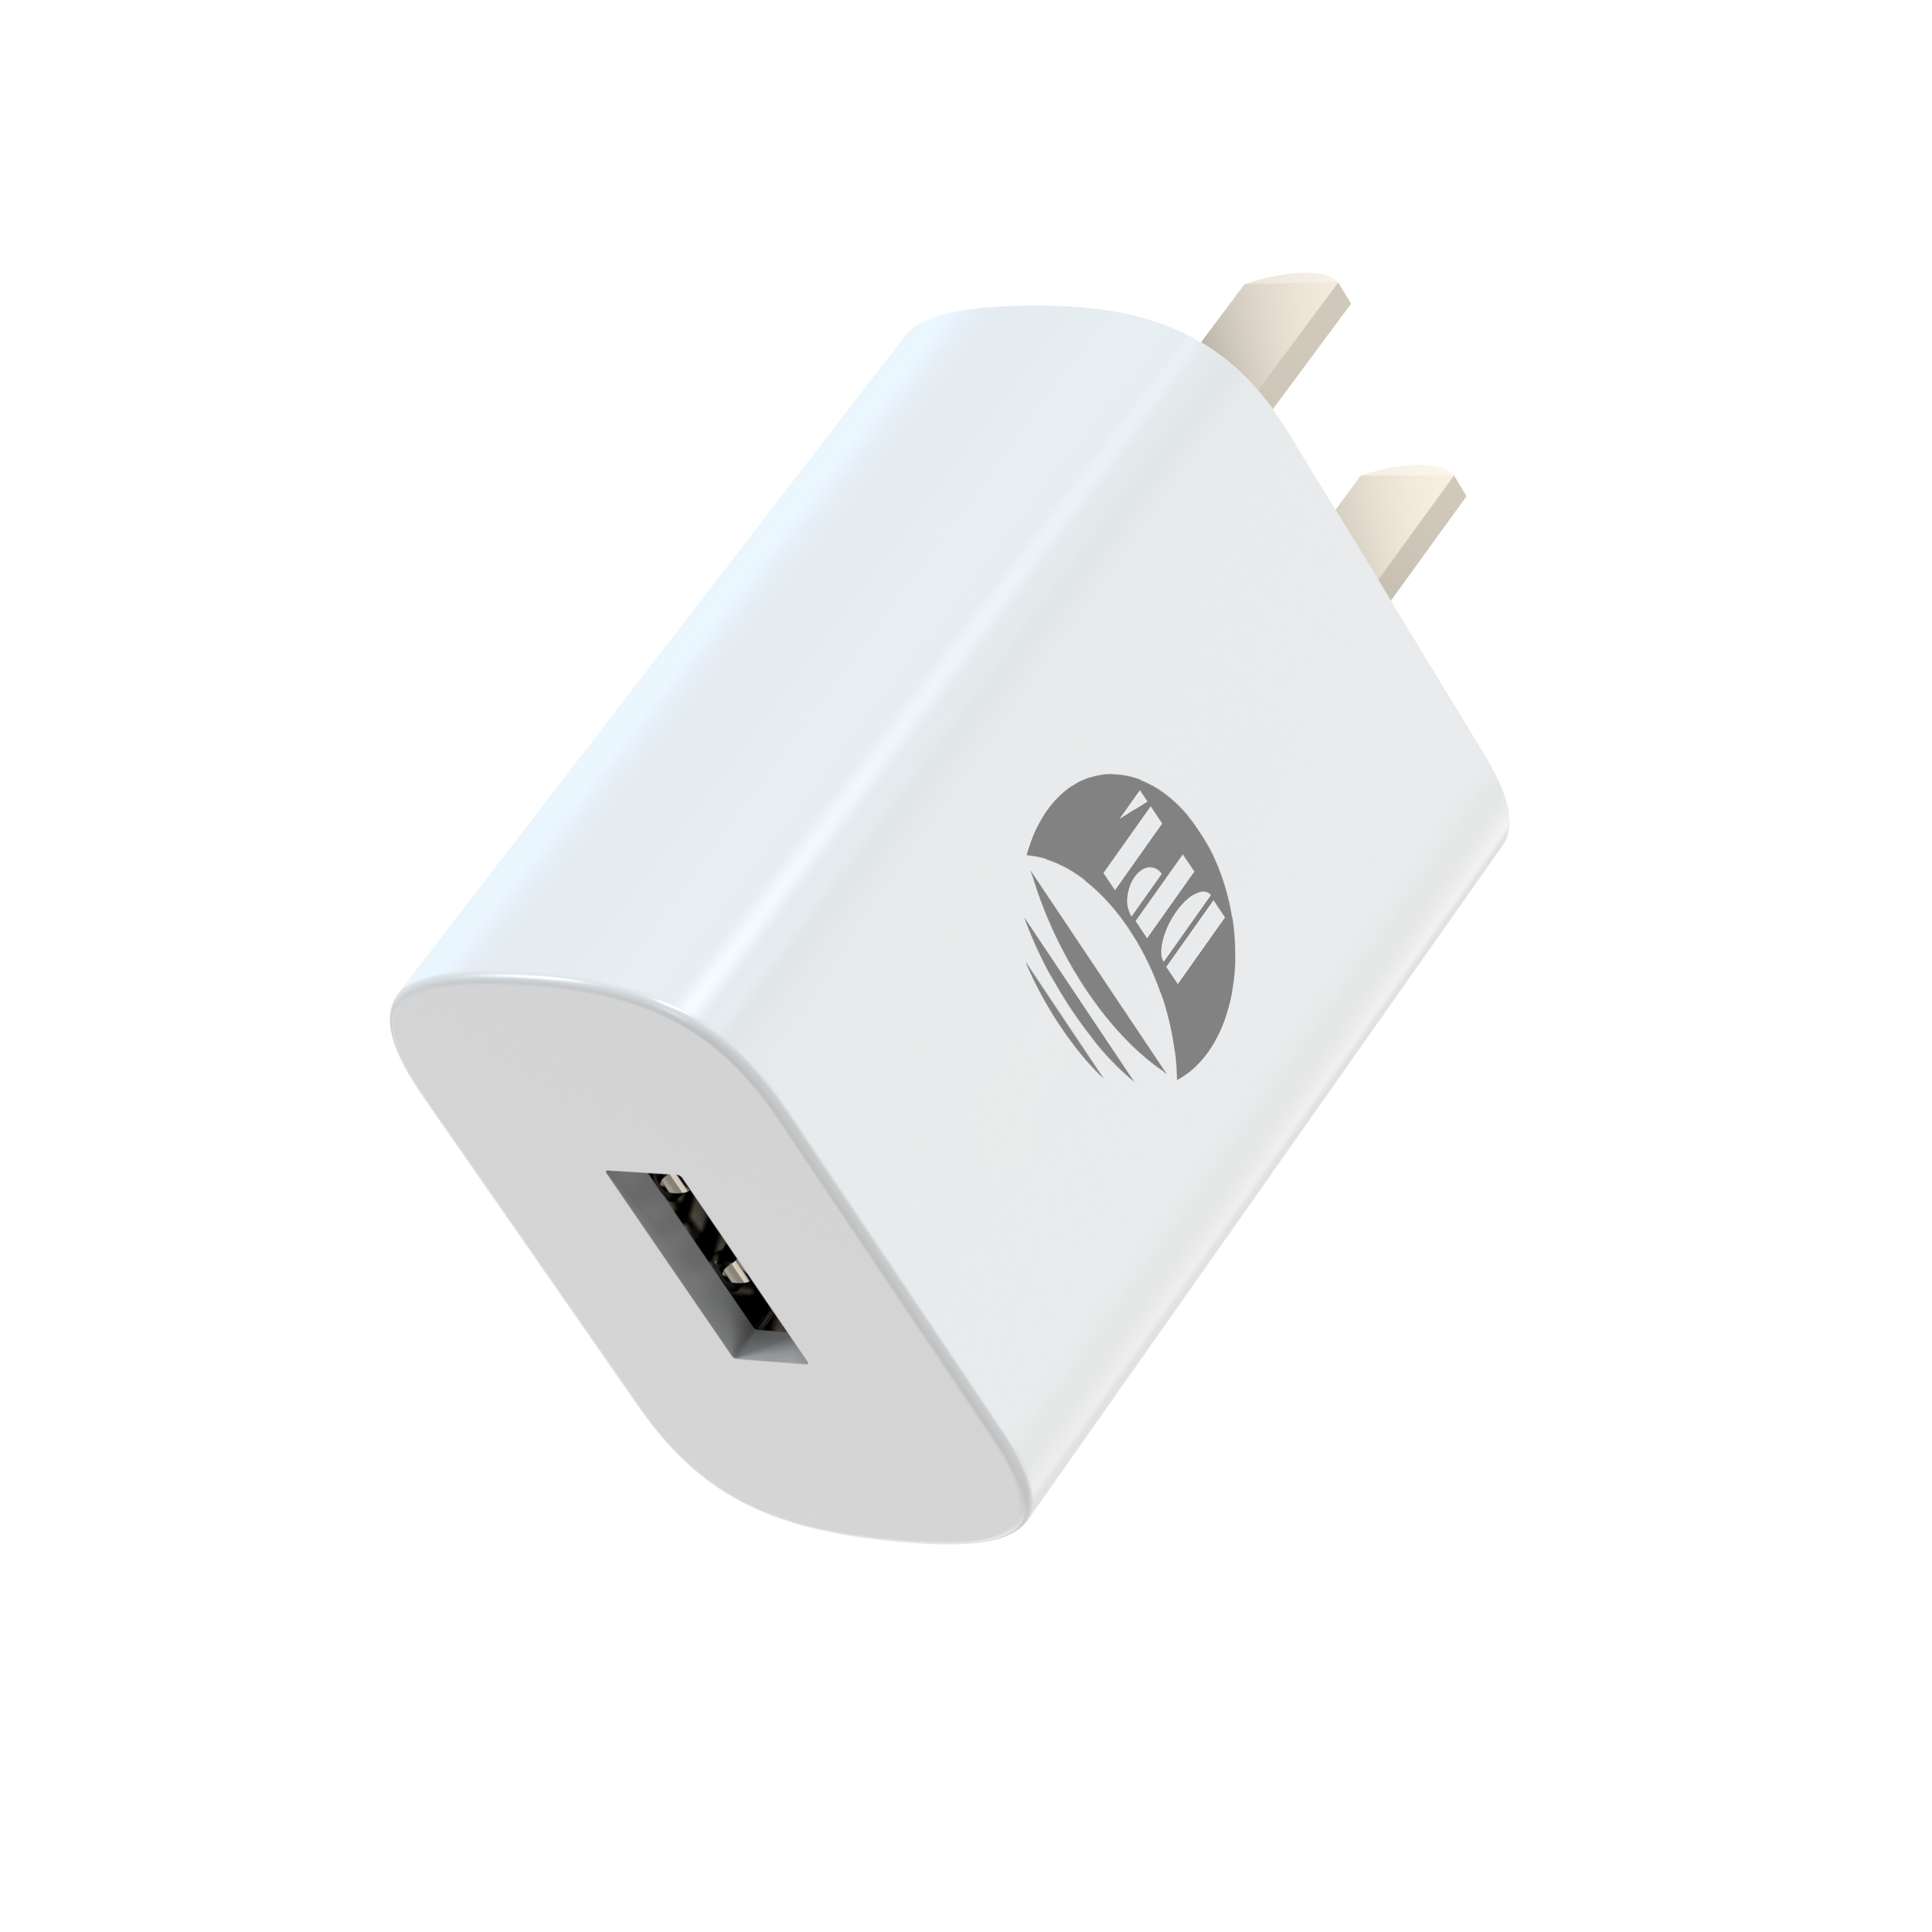 Universal fast charging USB wall charger